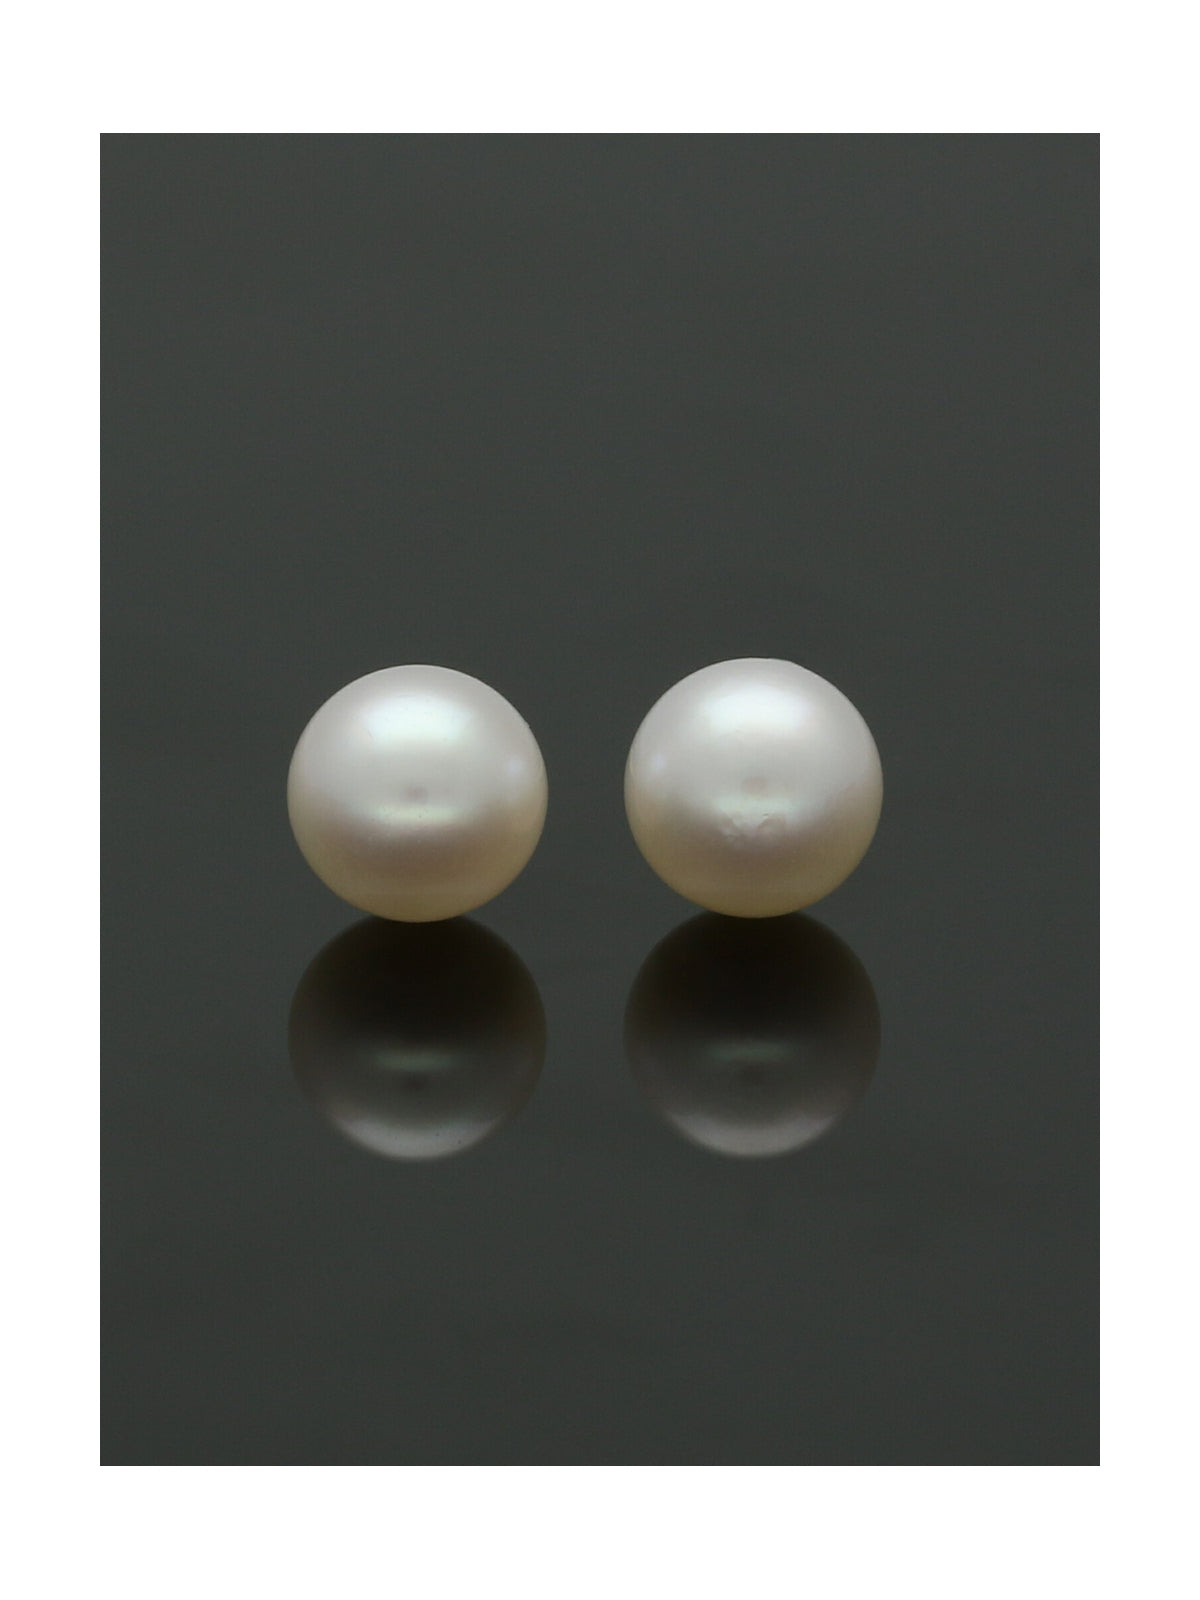 White Cultured Pearl Stud Earrings 5mm in 9ct Yellow Gold